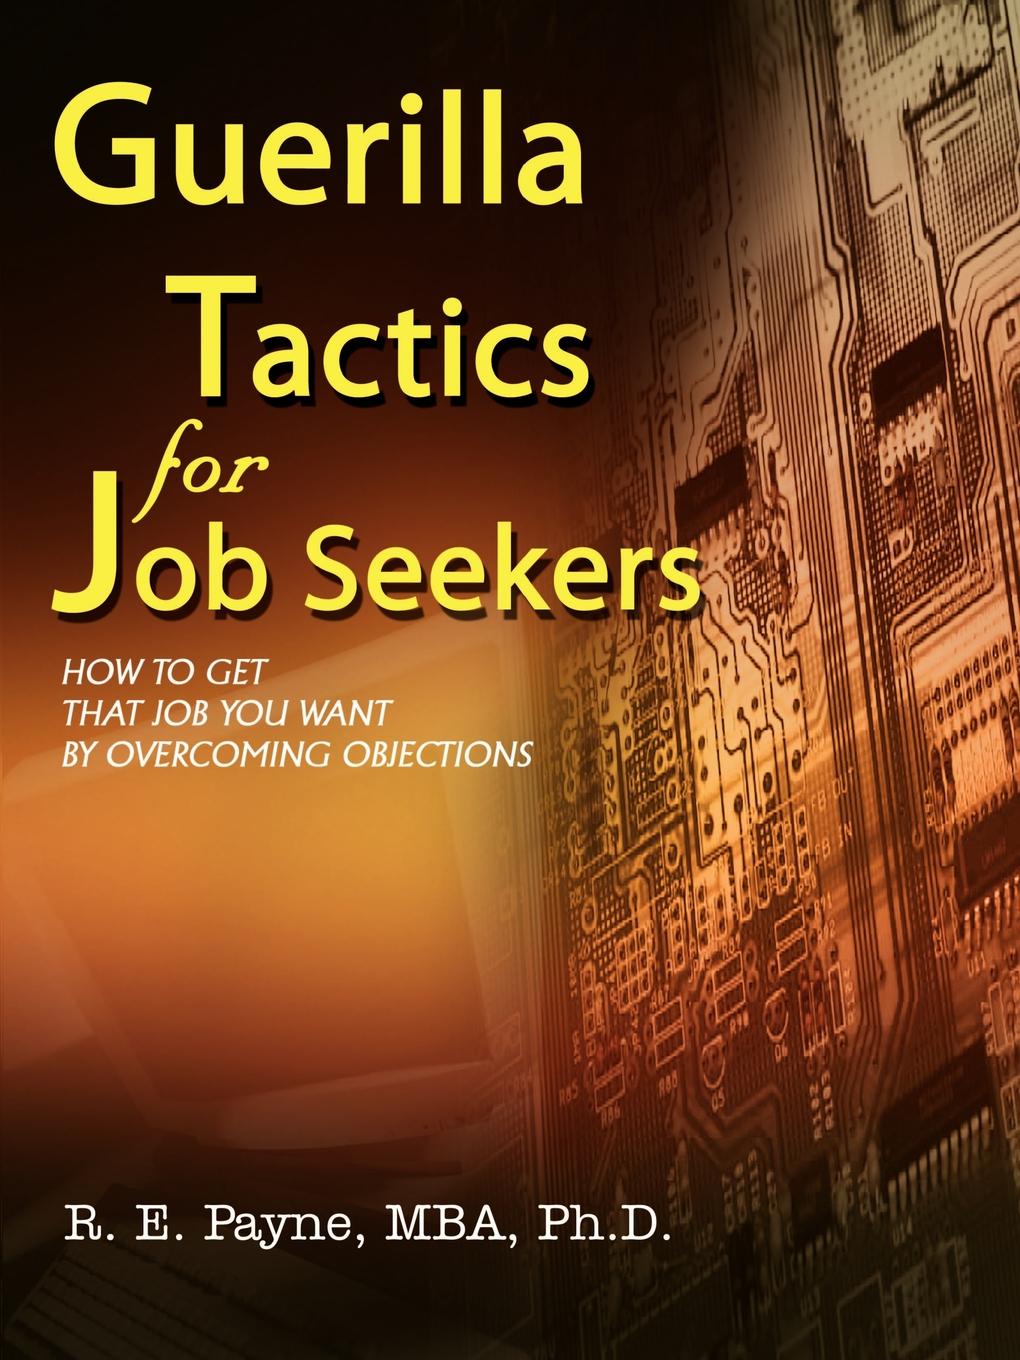 Guerilla Tactics for Job Seekers. How to Get That Job You Want By Overcoming Objections